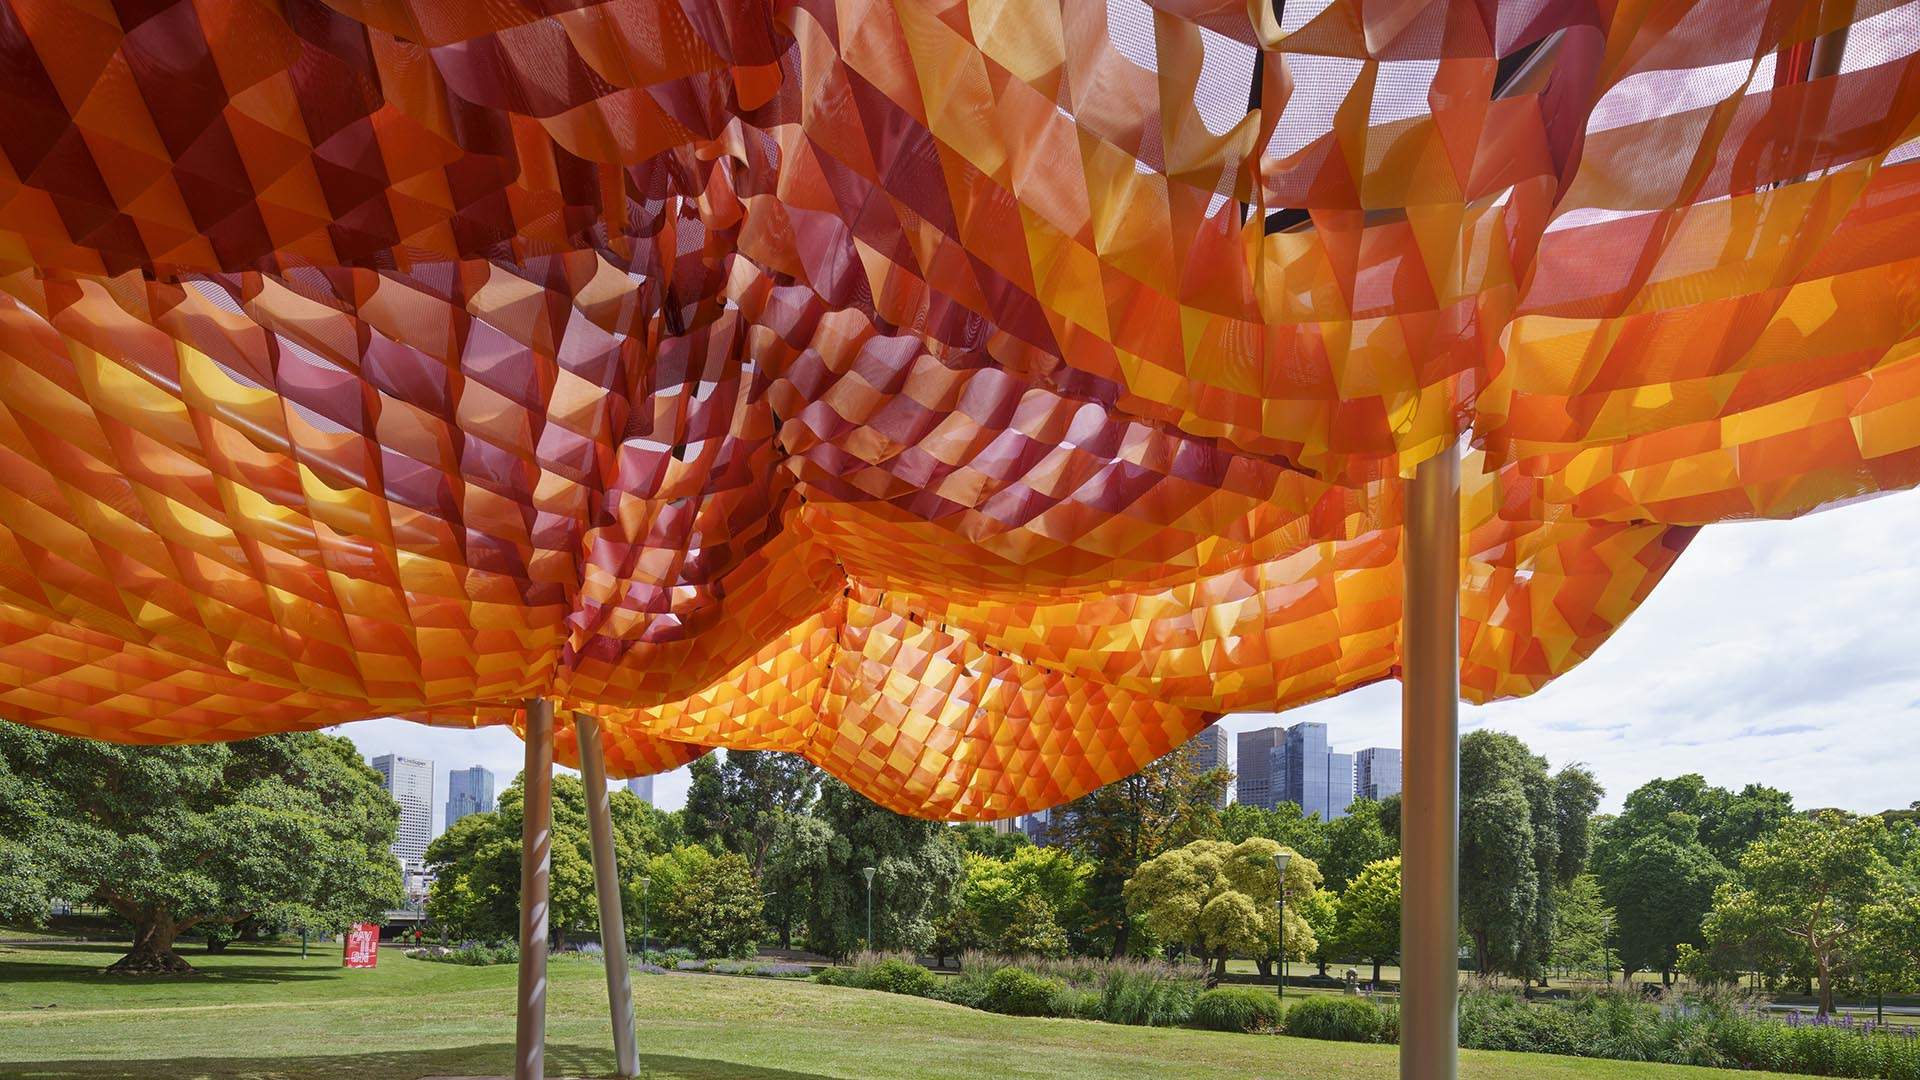 MPavilion Is Back for Another Summer and Autumn Filled with 250-Plus Free Arts and Design Events